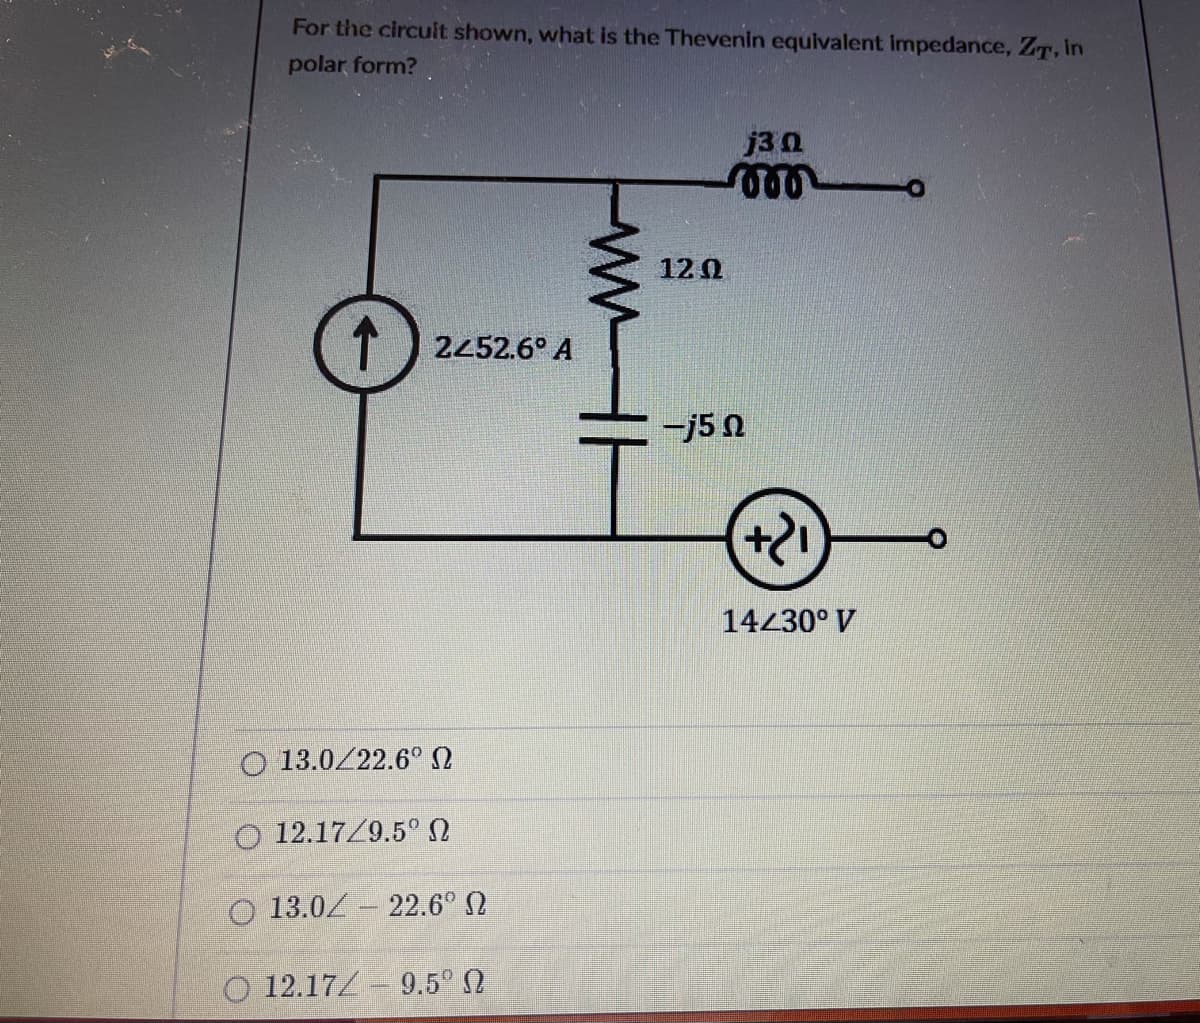 For the circuit shown, what is the Thevenin equivalent impedance, ZT, in
polar form?
j30
120
2452.6° A
-j5 N
14430° V
O 13.0/22.6°
O 12.17/9.5° N
O 13.0Z – 22.6° N
O 12.17 - 9.5° N
